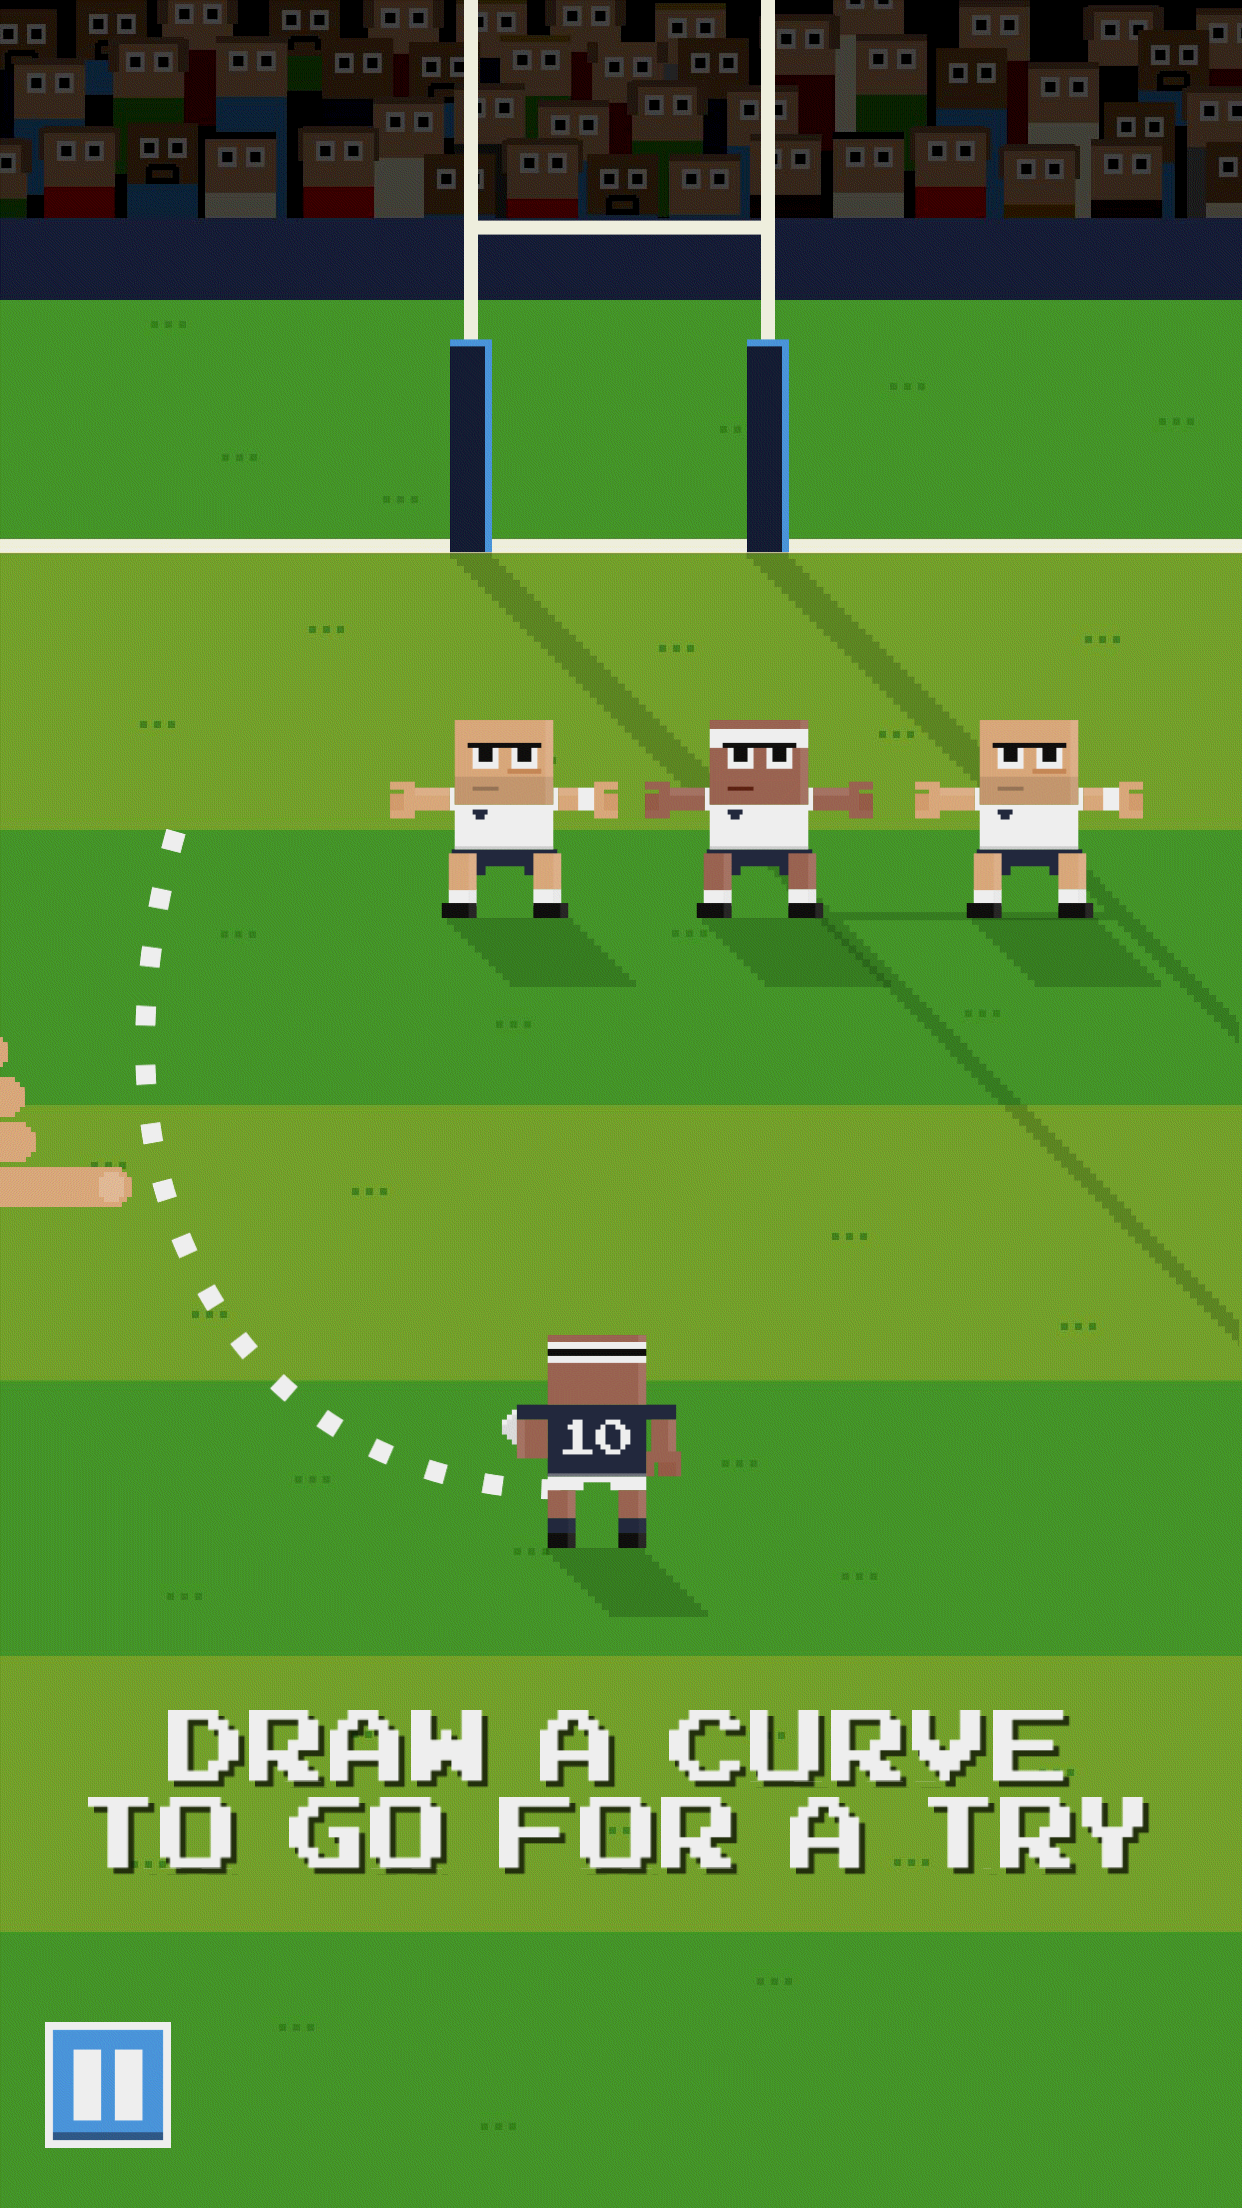 Retro Rugby